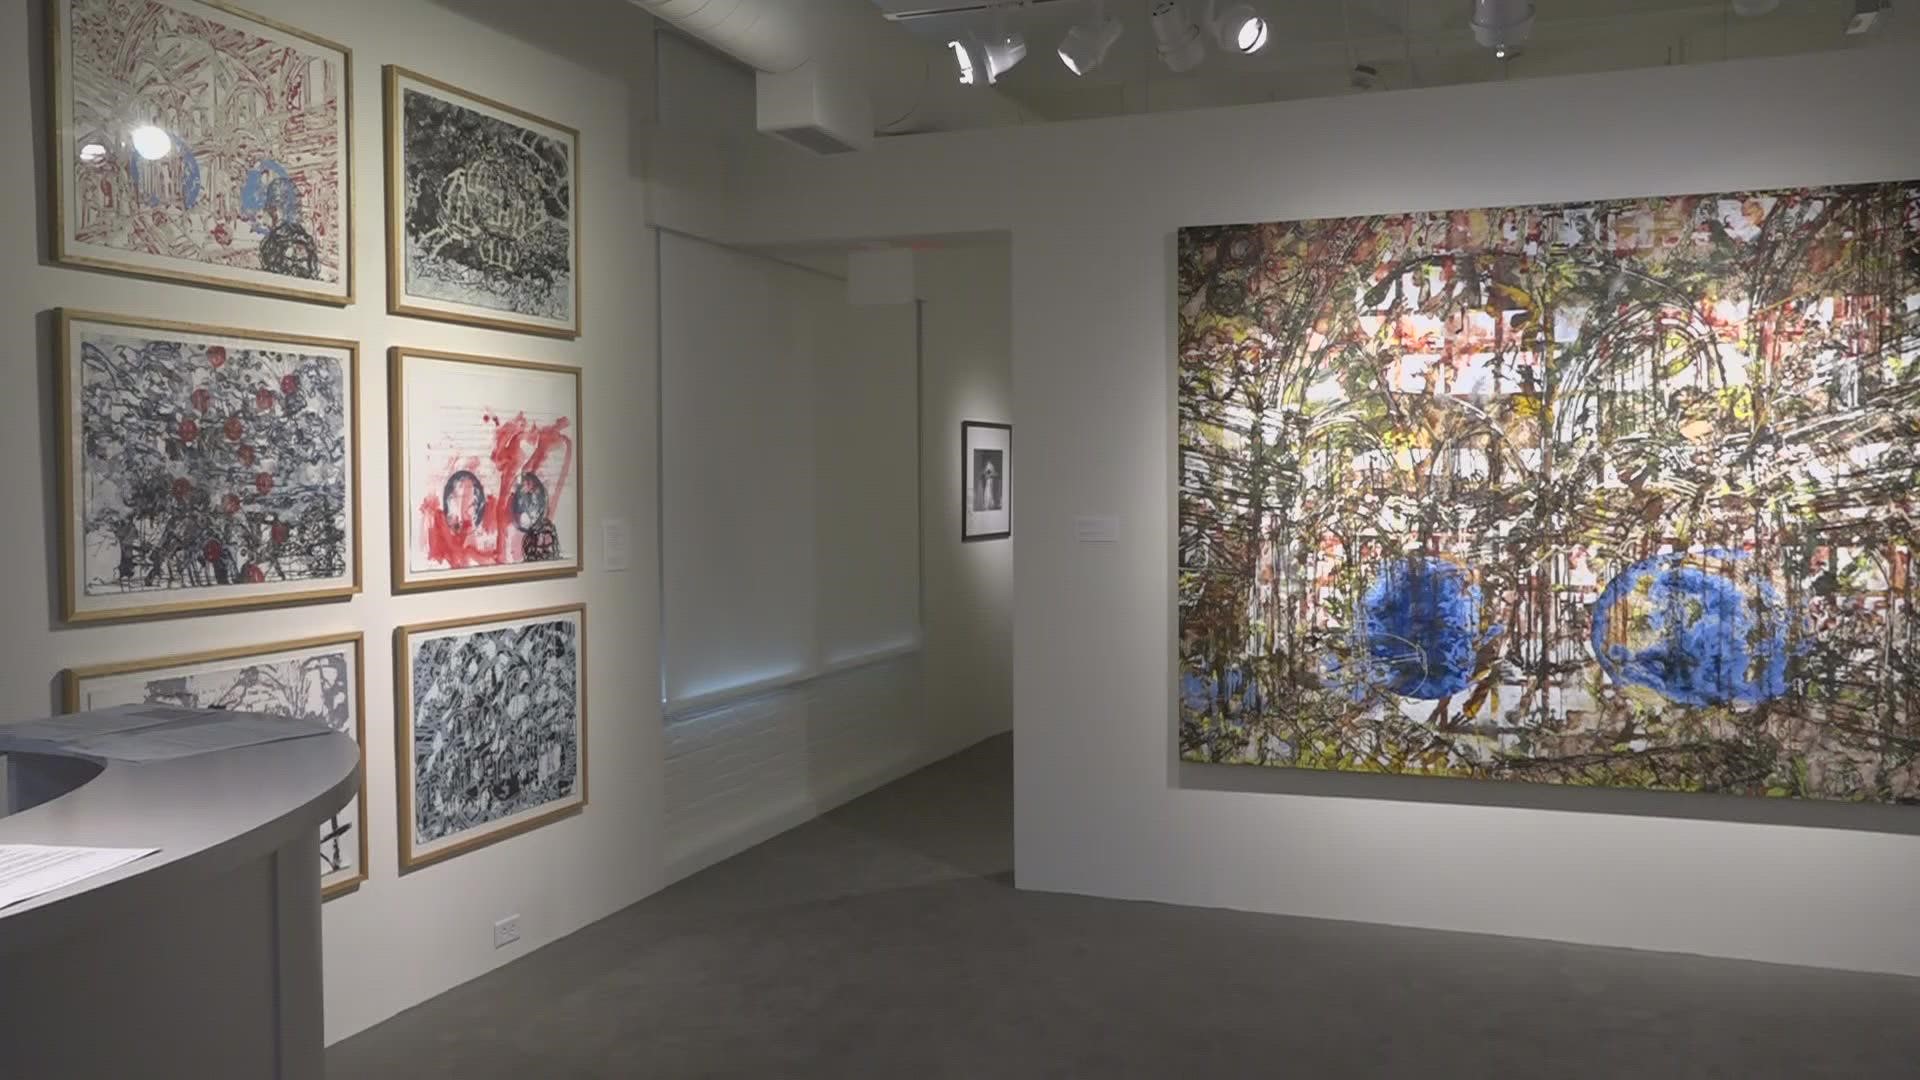 The museum's new exhibit features five new contemporary art galleries.